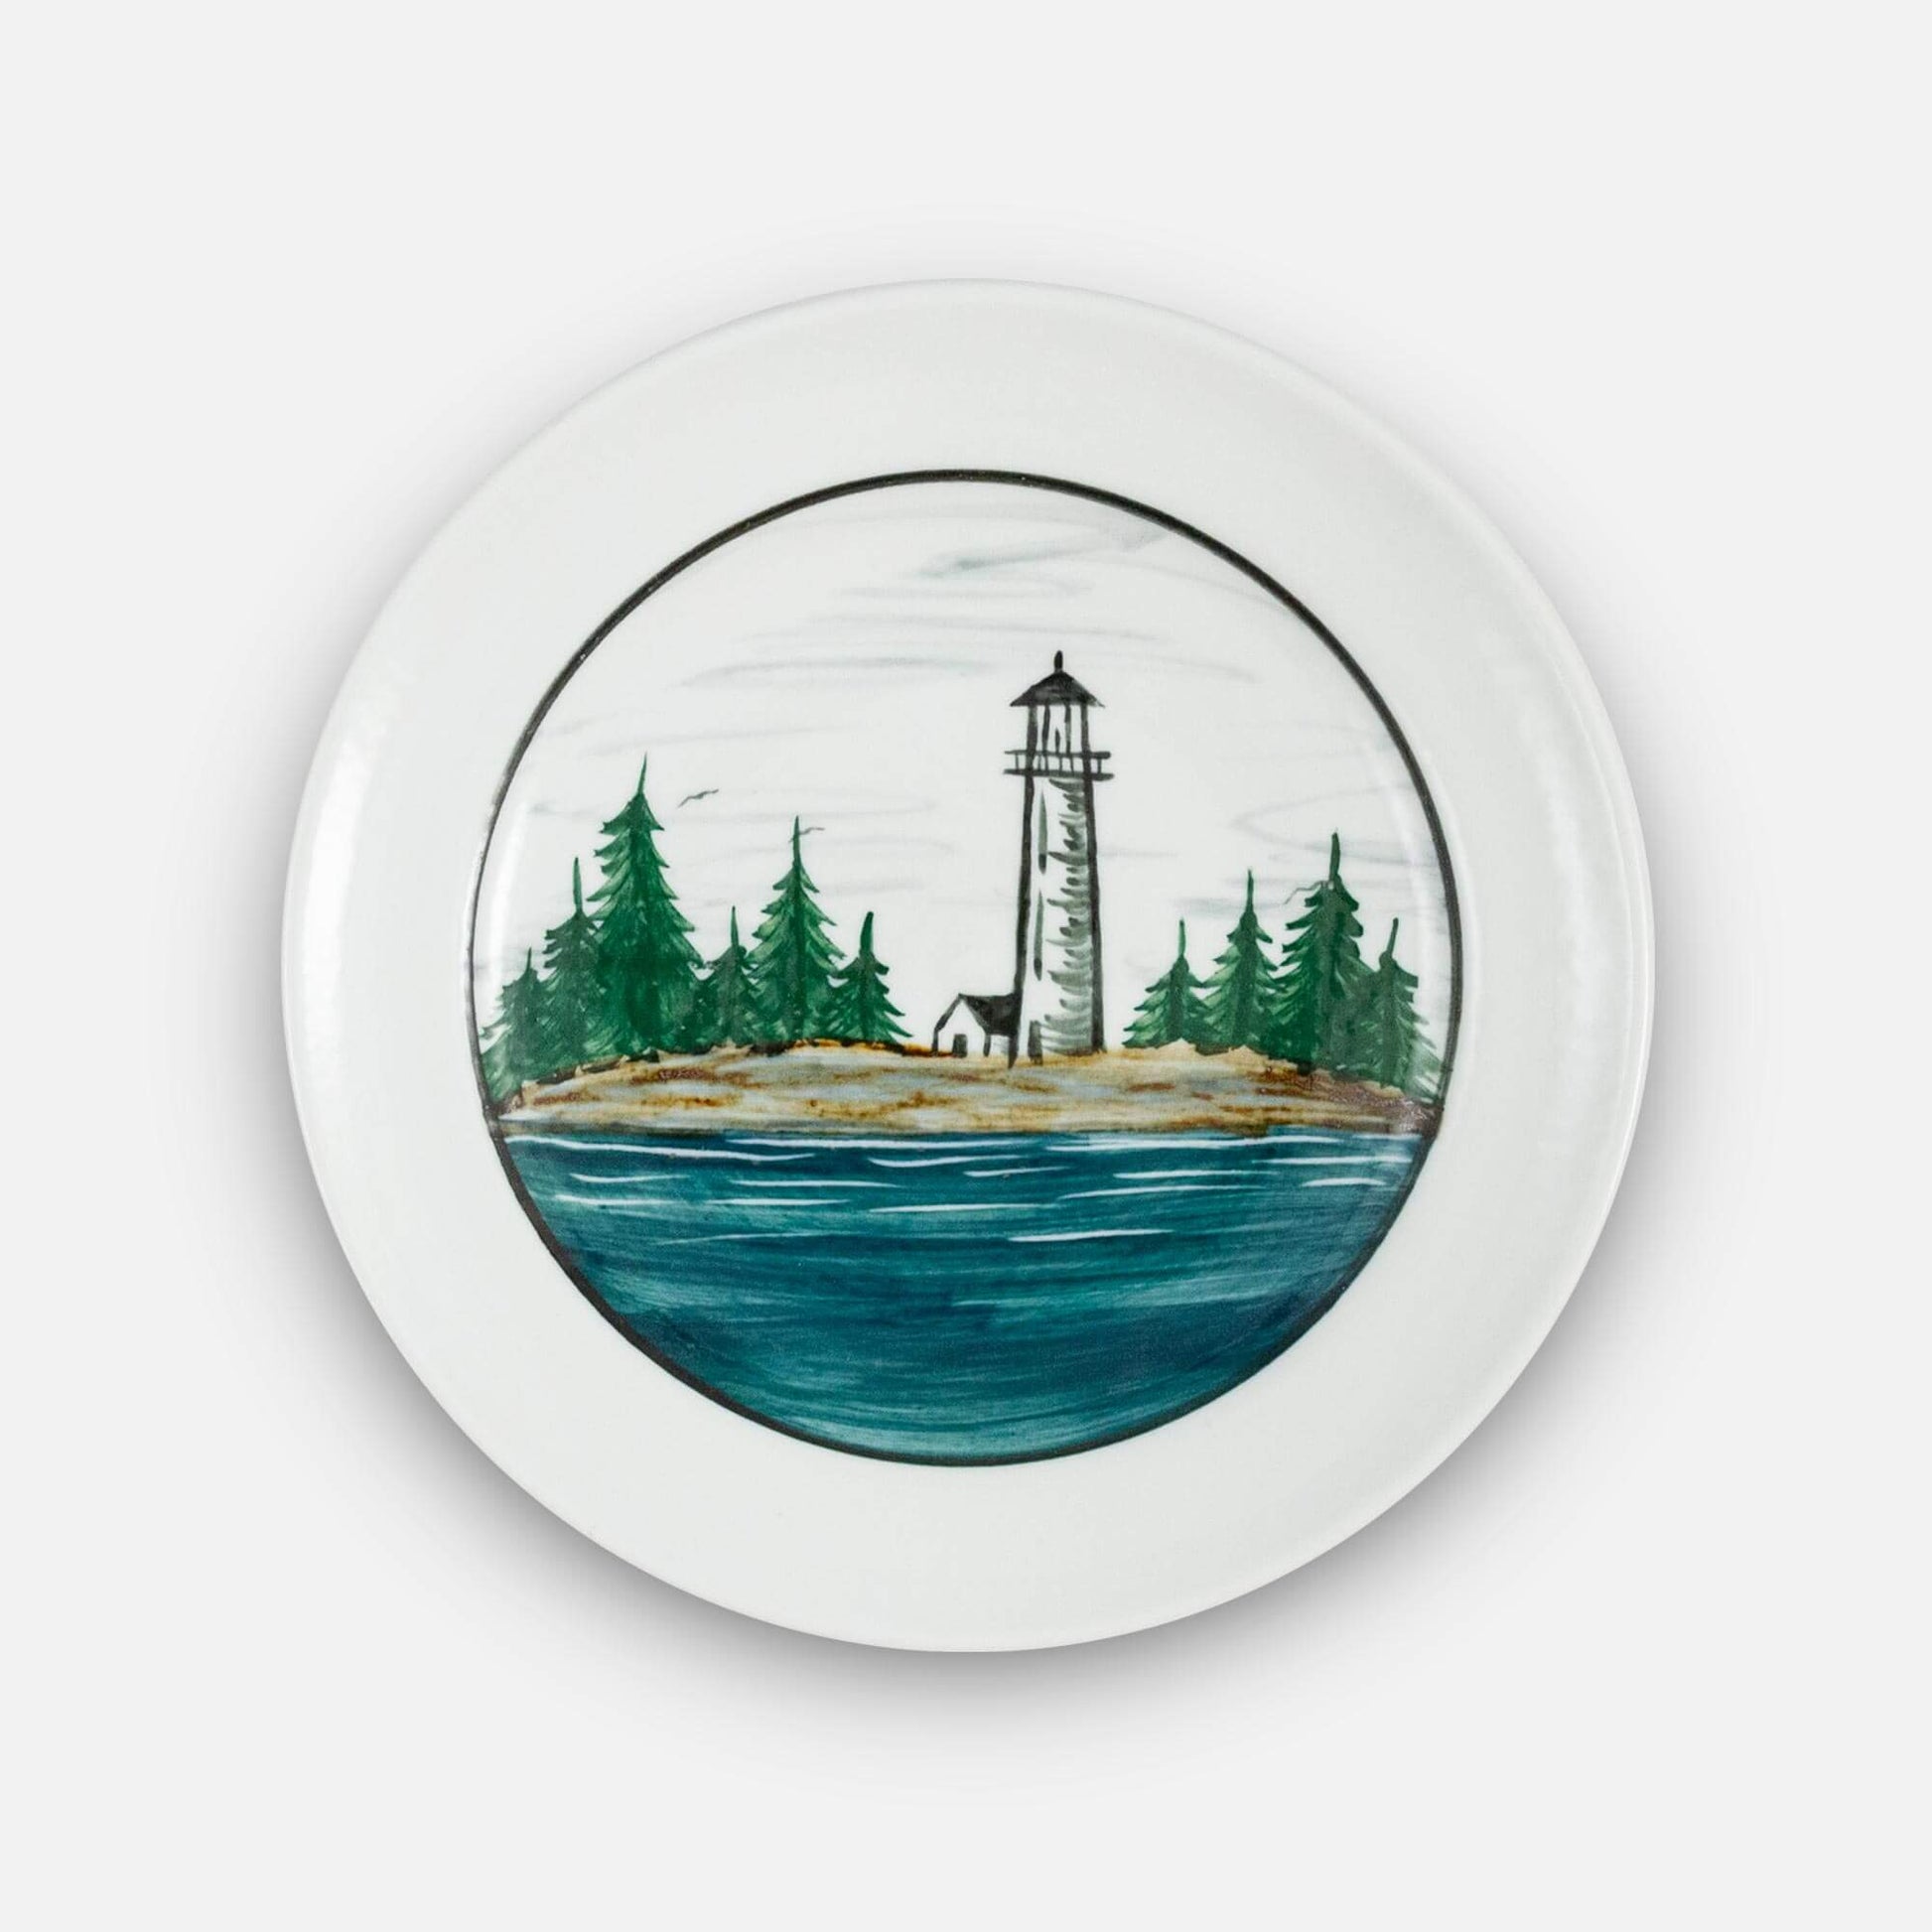 Handmade Pottery Rimless Dinner Plate made by Georgetown Pottery in Maine in Lighthouse pattern